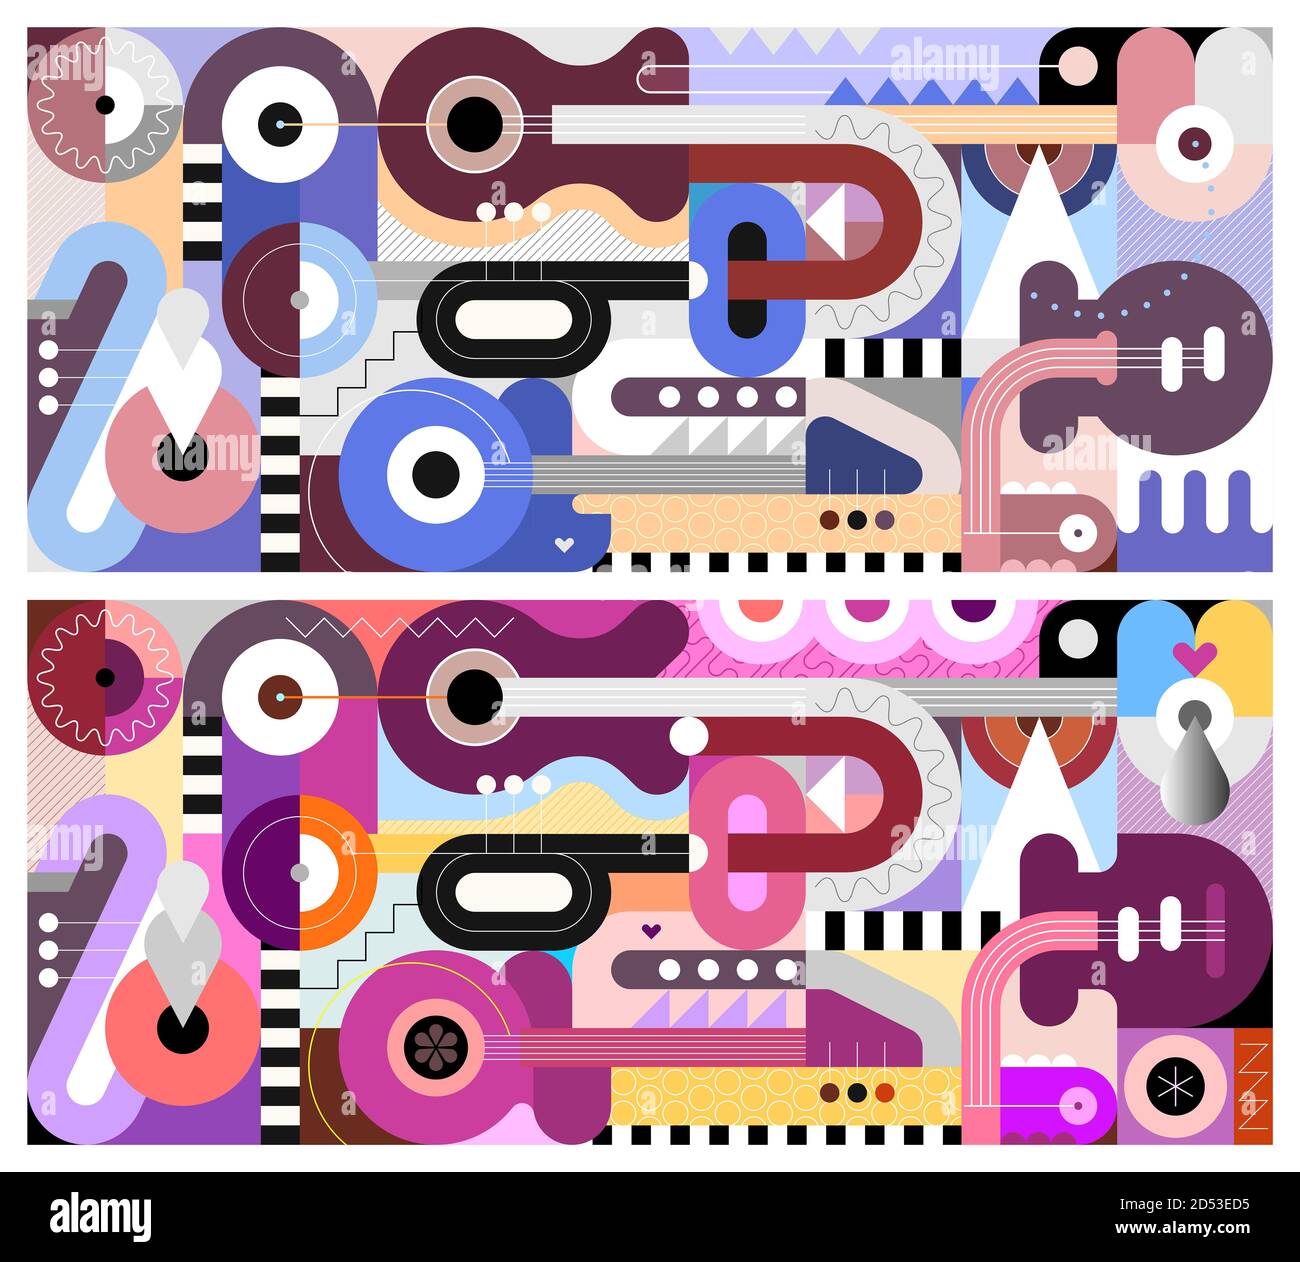 Colored geometric style design with different musical instruments, vector illustration. Abstract art composition of guitars, trumpet, saxophone and ge Stock Photo